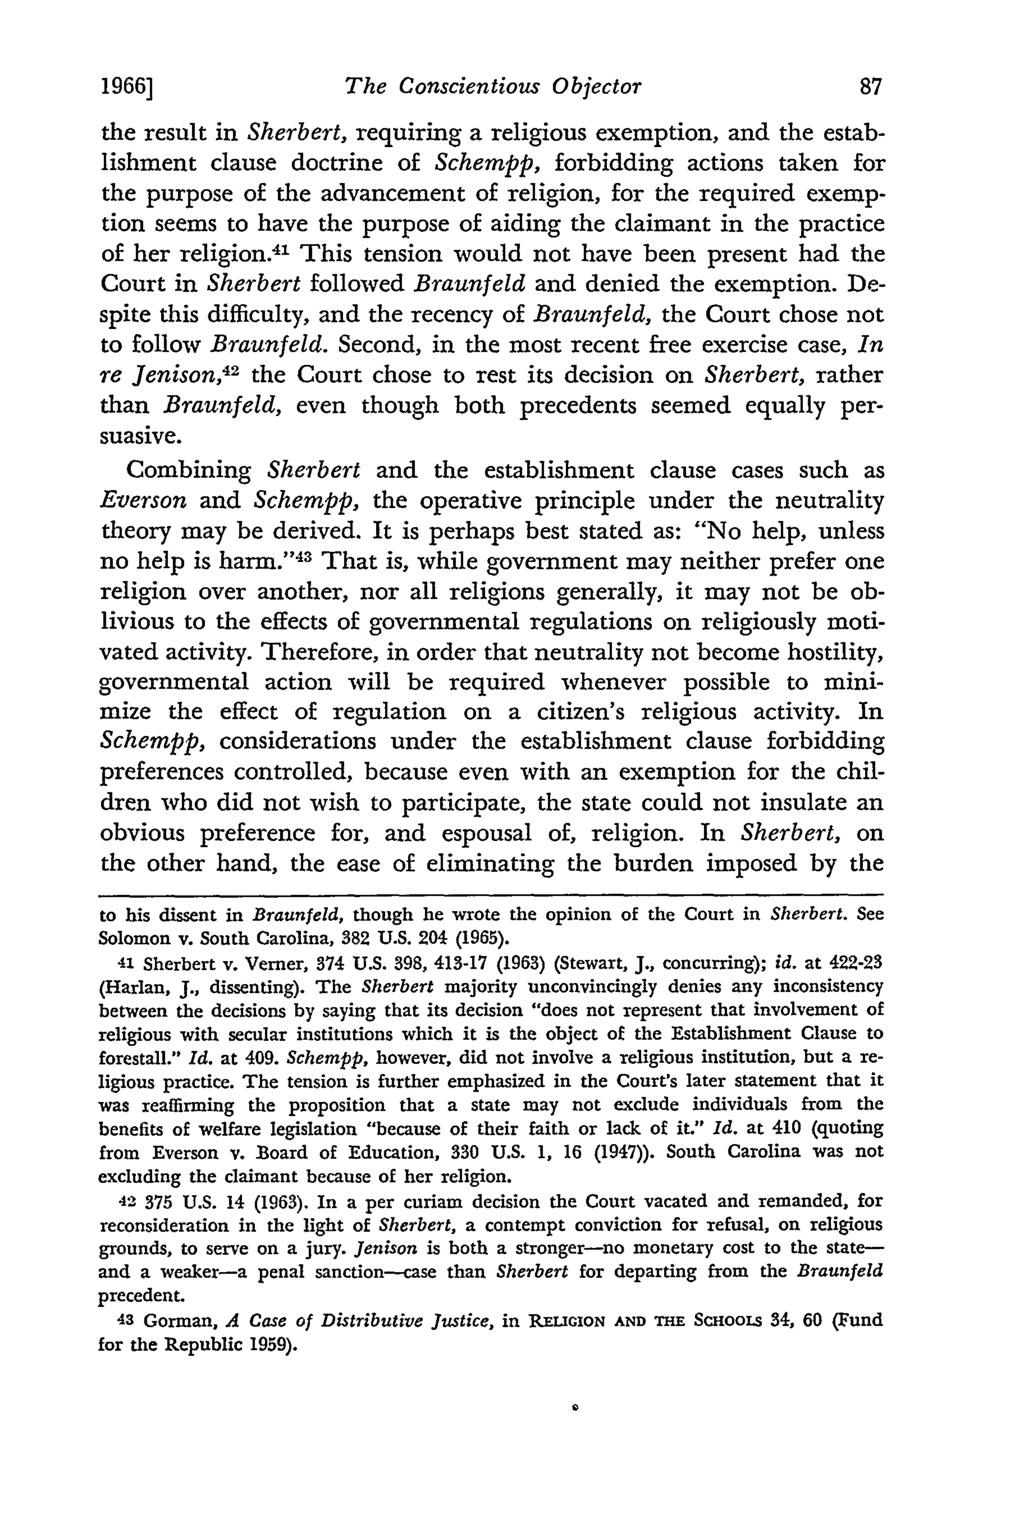 1966] The Conscientious Objector the result in Sherbert, requiring a religious exemption, and the establishment clause doctrine of Schempp, forbidding actions taken for the purpose of the advancement